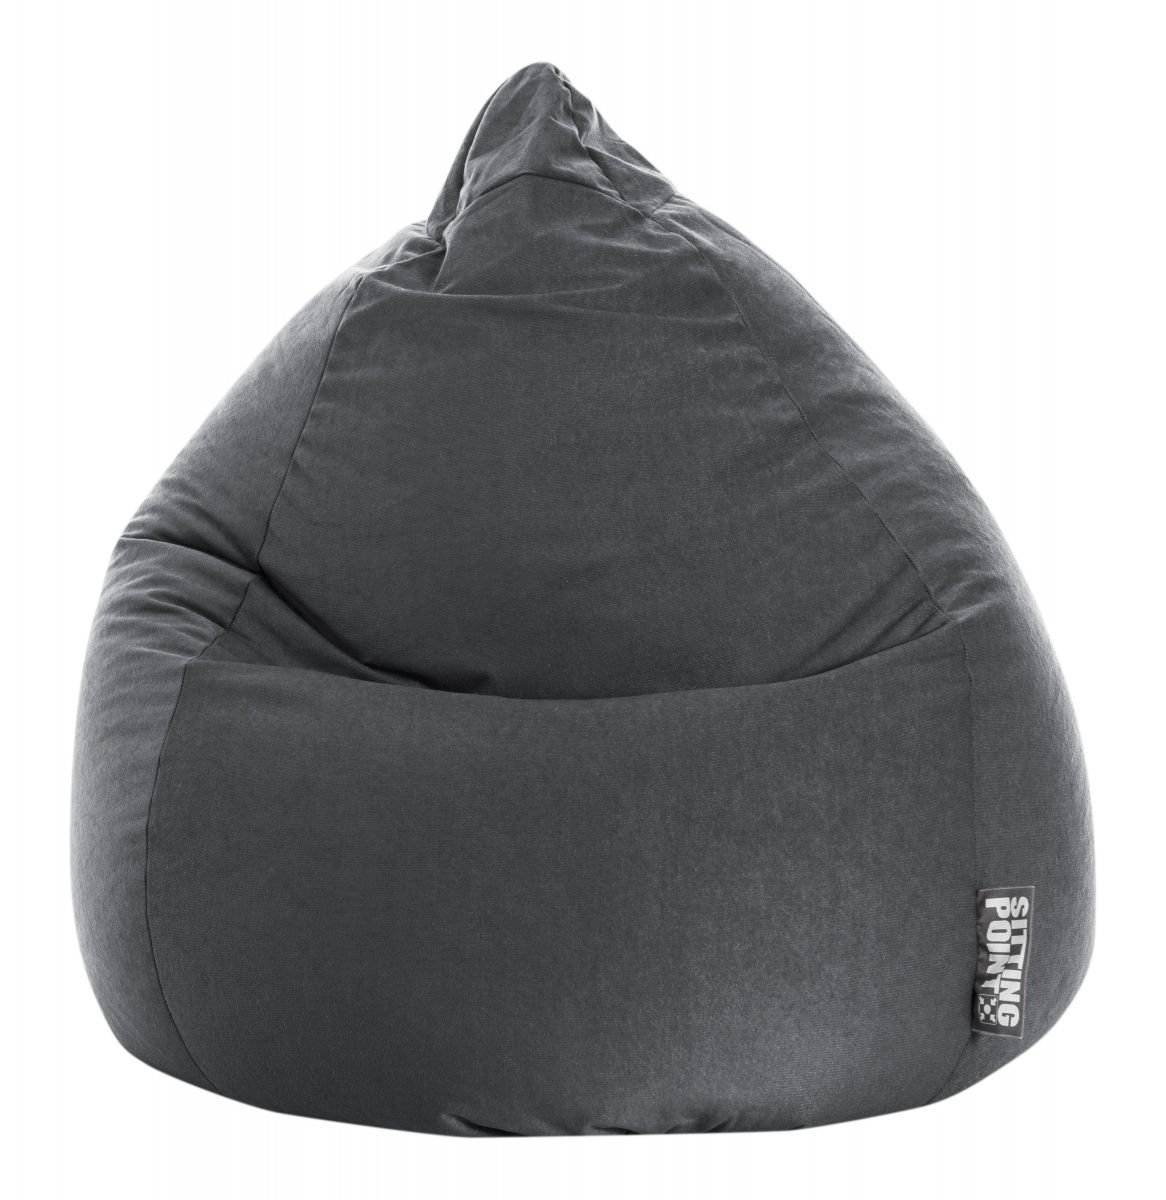 sitting point beanbag easy xl antraciet